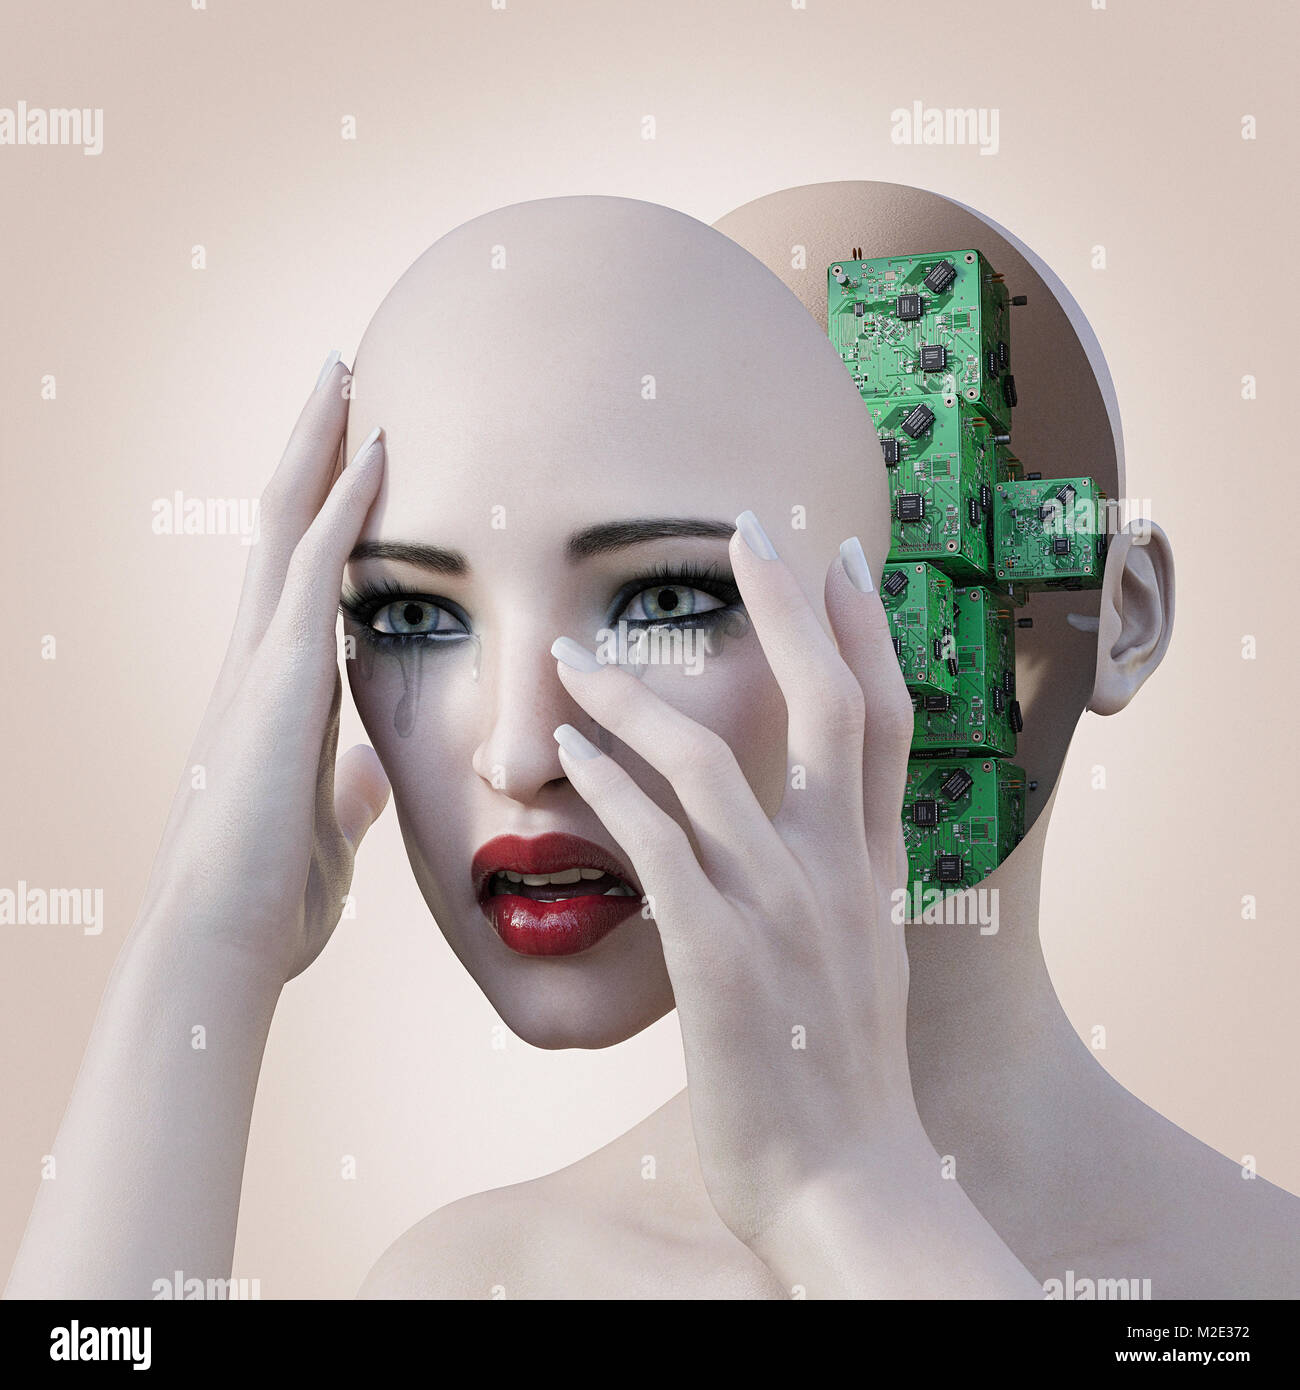 Robot woman holding removable face mask revealing circuits Stock Photo